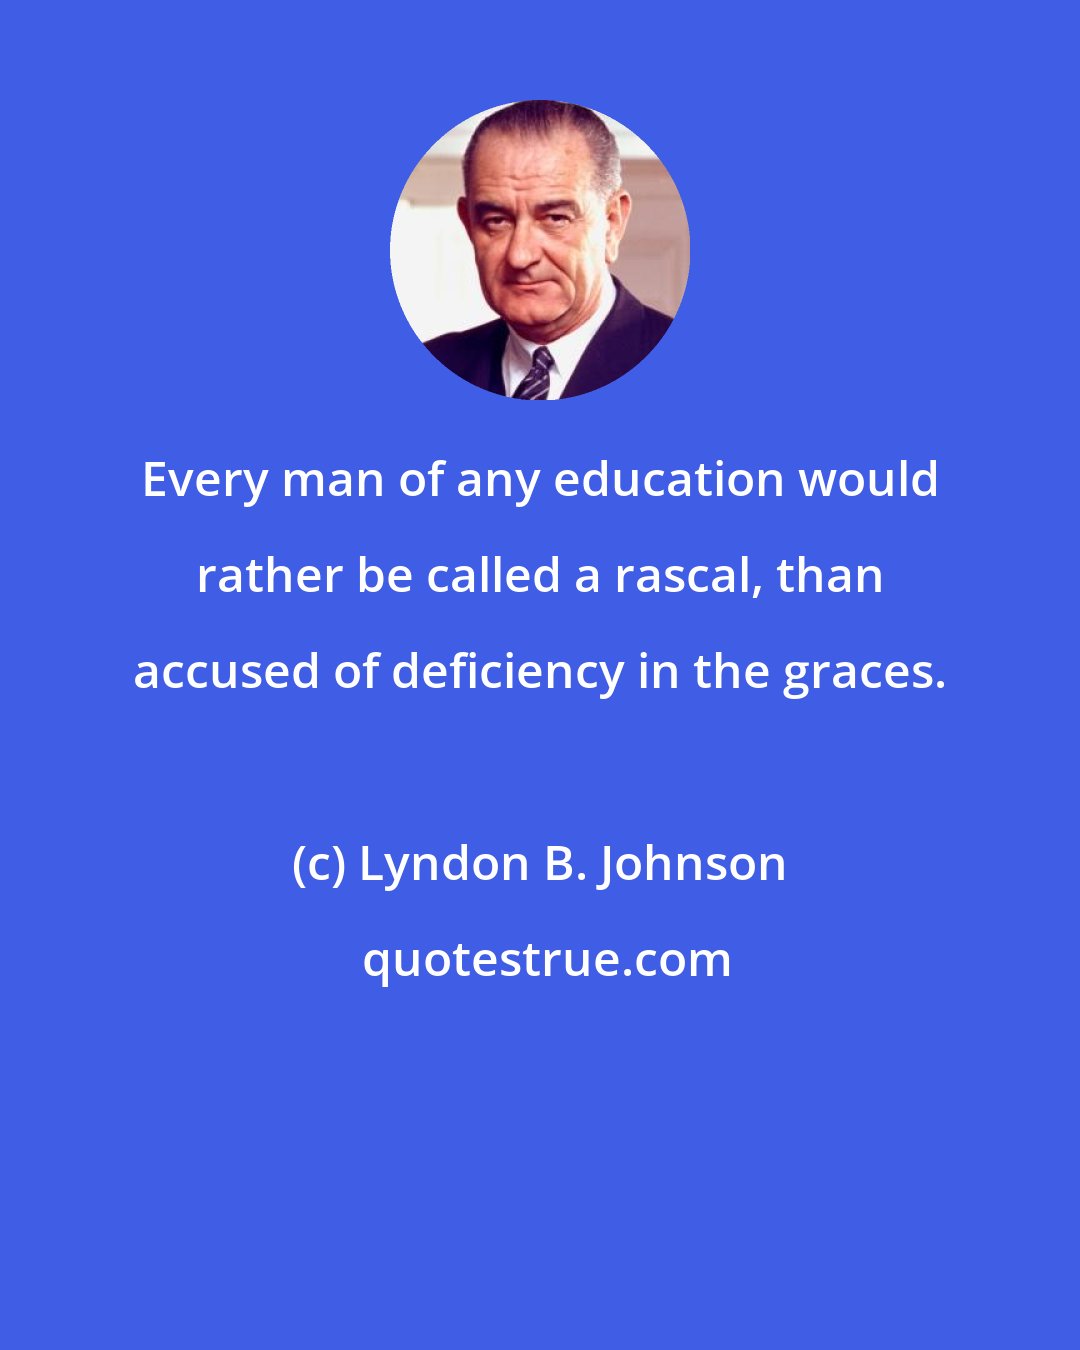 Lyndon B. Johnson: Every man of any education would rather be called a rascal, than accused of deficiency in the graces.